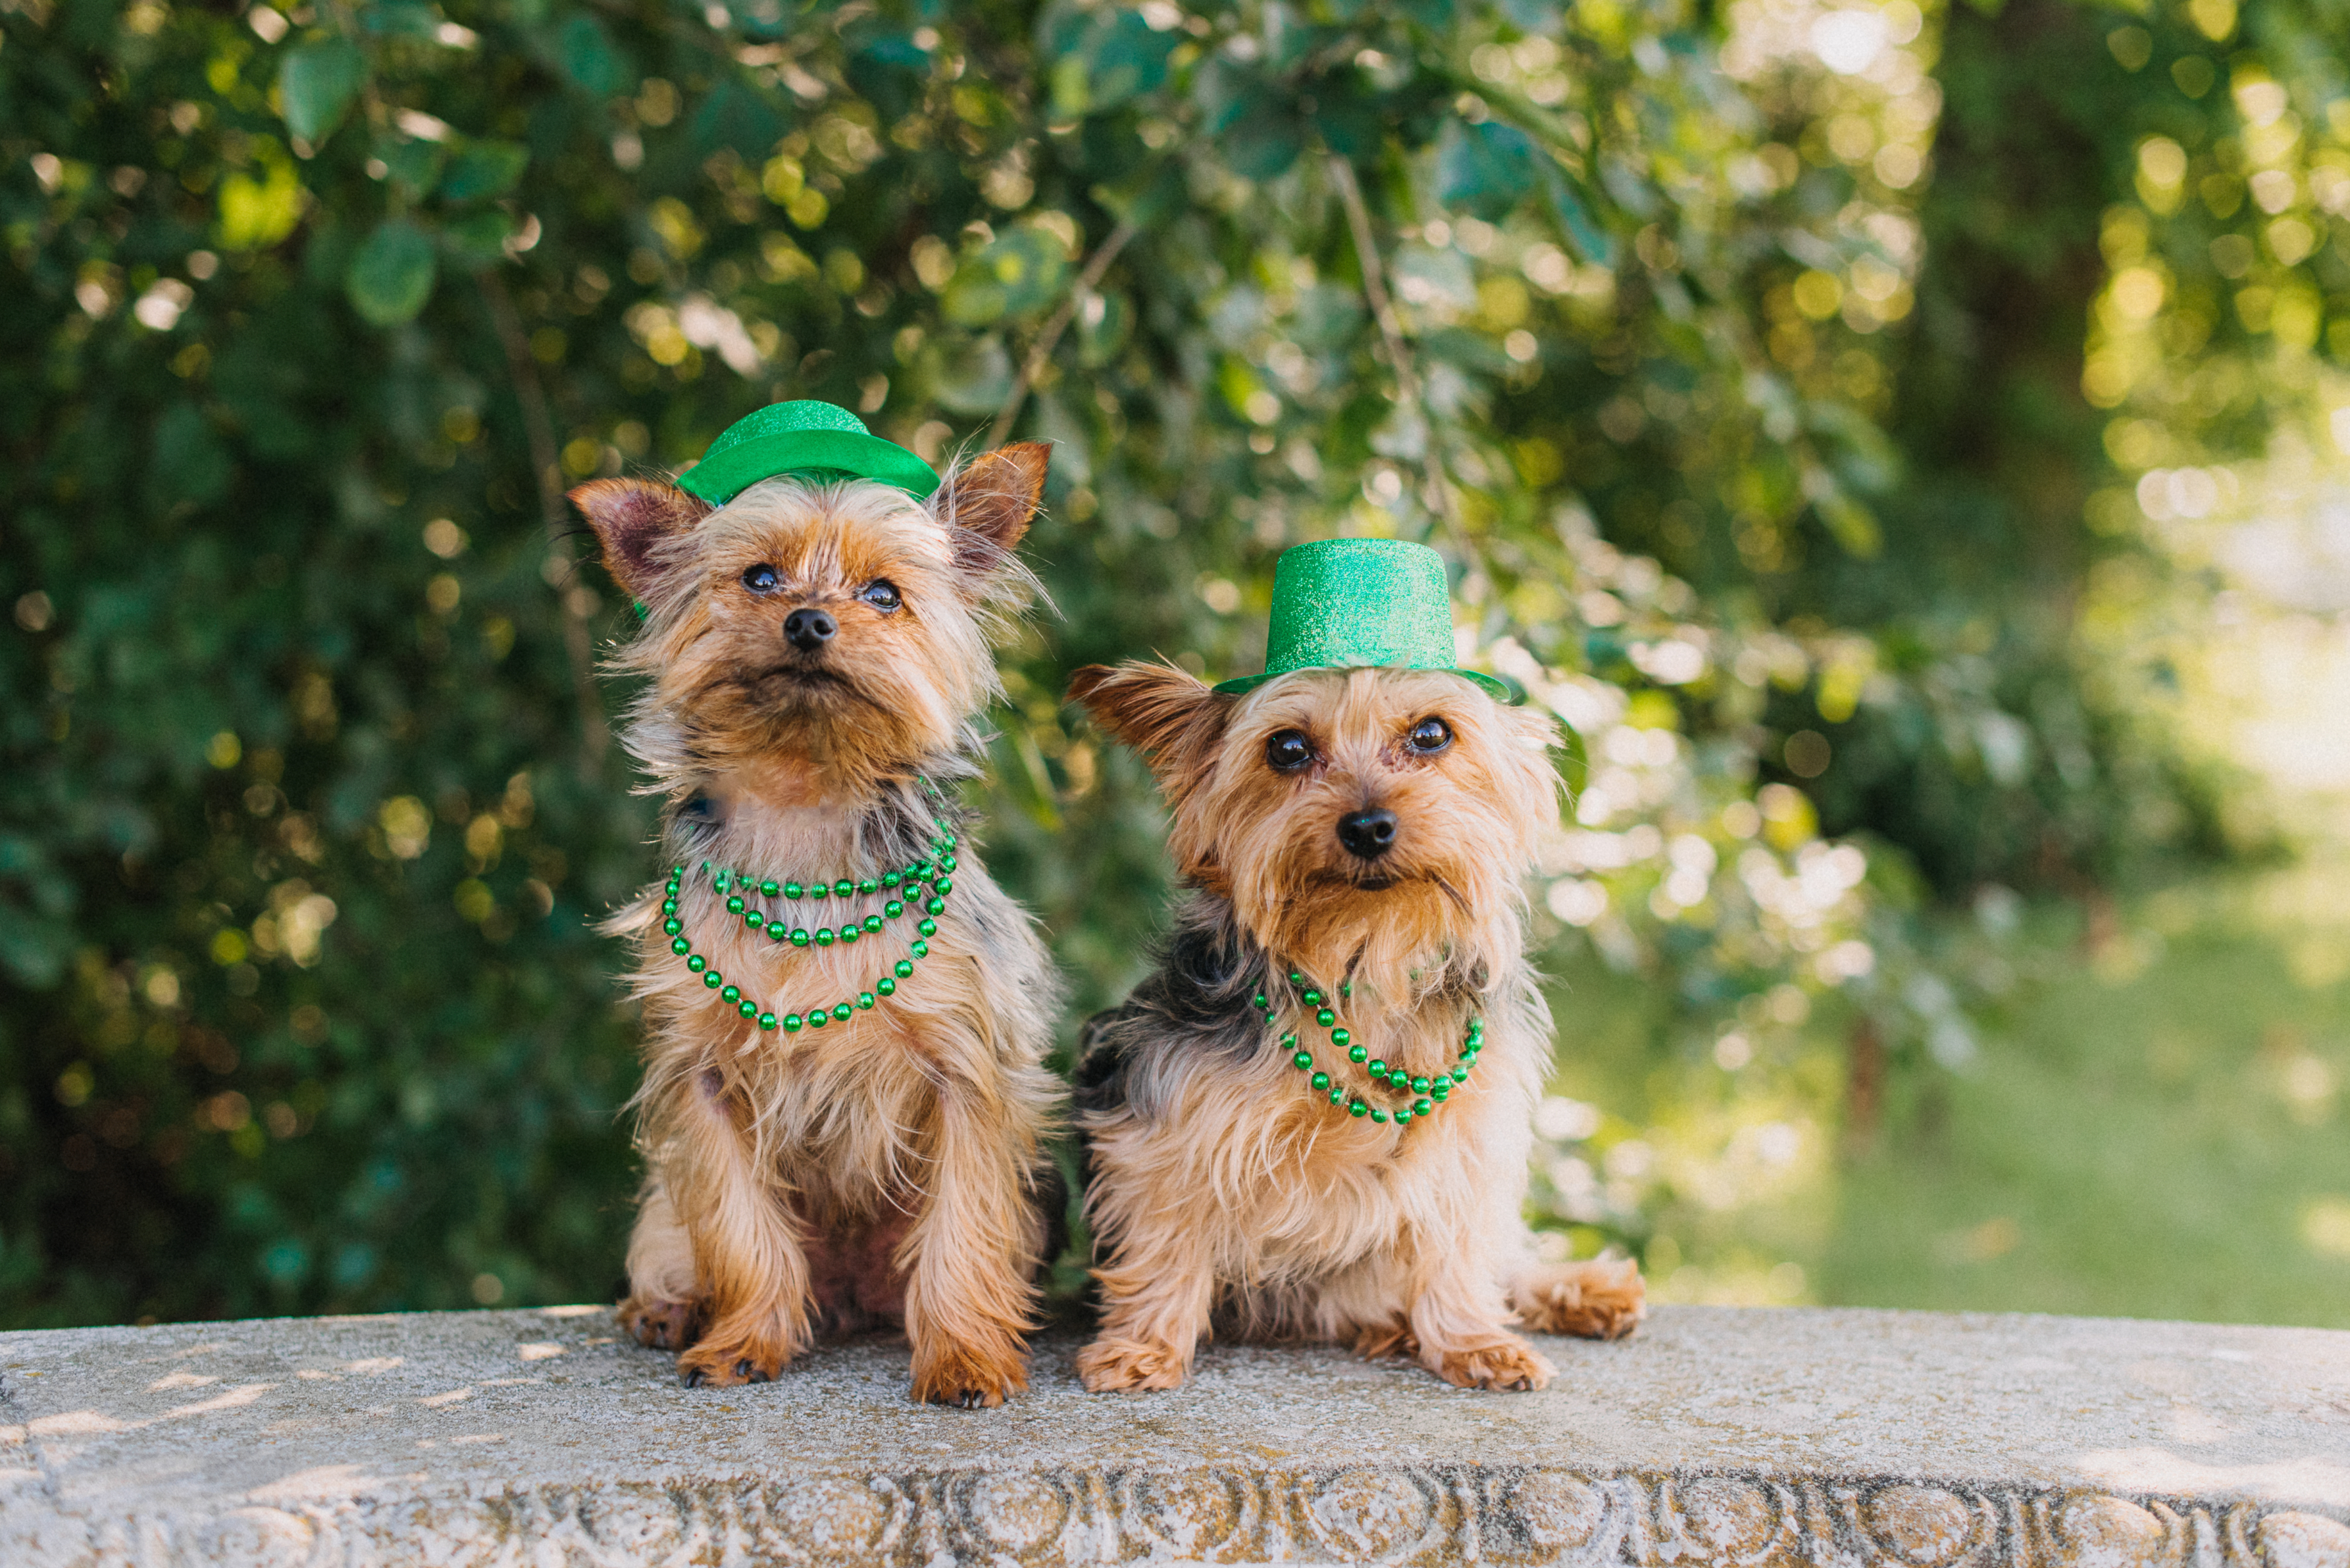 Two Yorkshire Terriers wearing green hats and beads sitting side by side